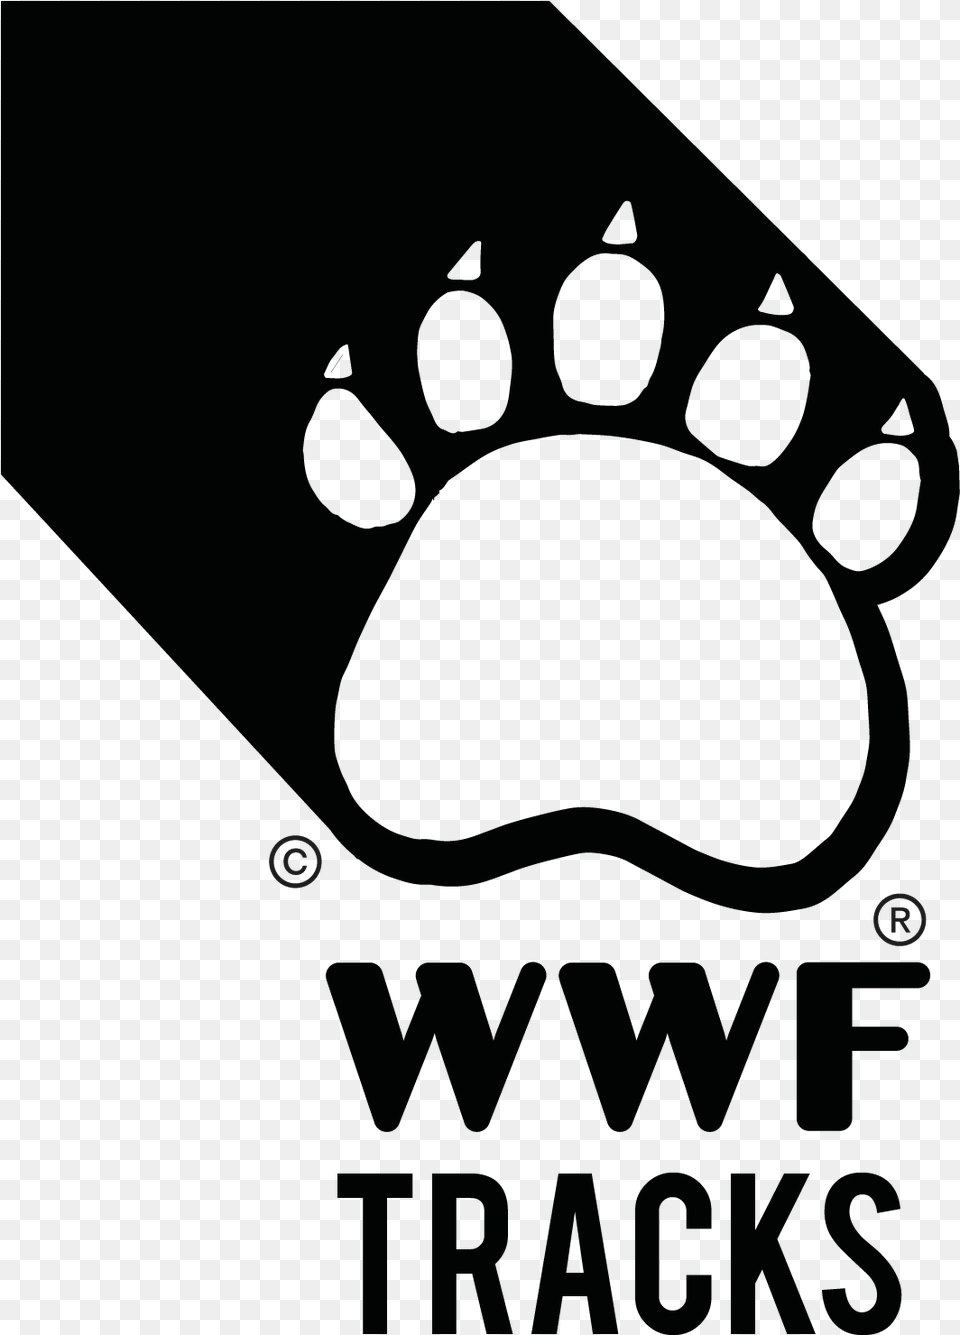 Wwf Logo 24 World Wide Fund For Nature, Footprint Free Png Download